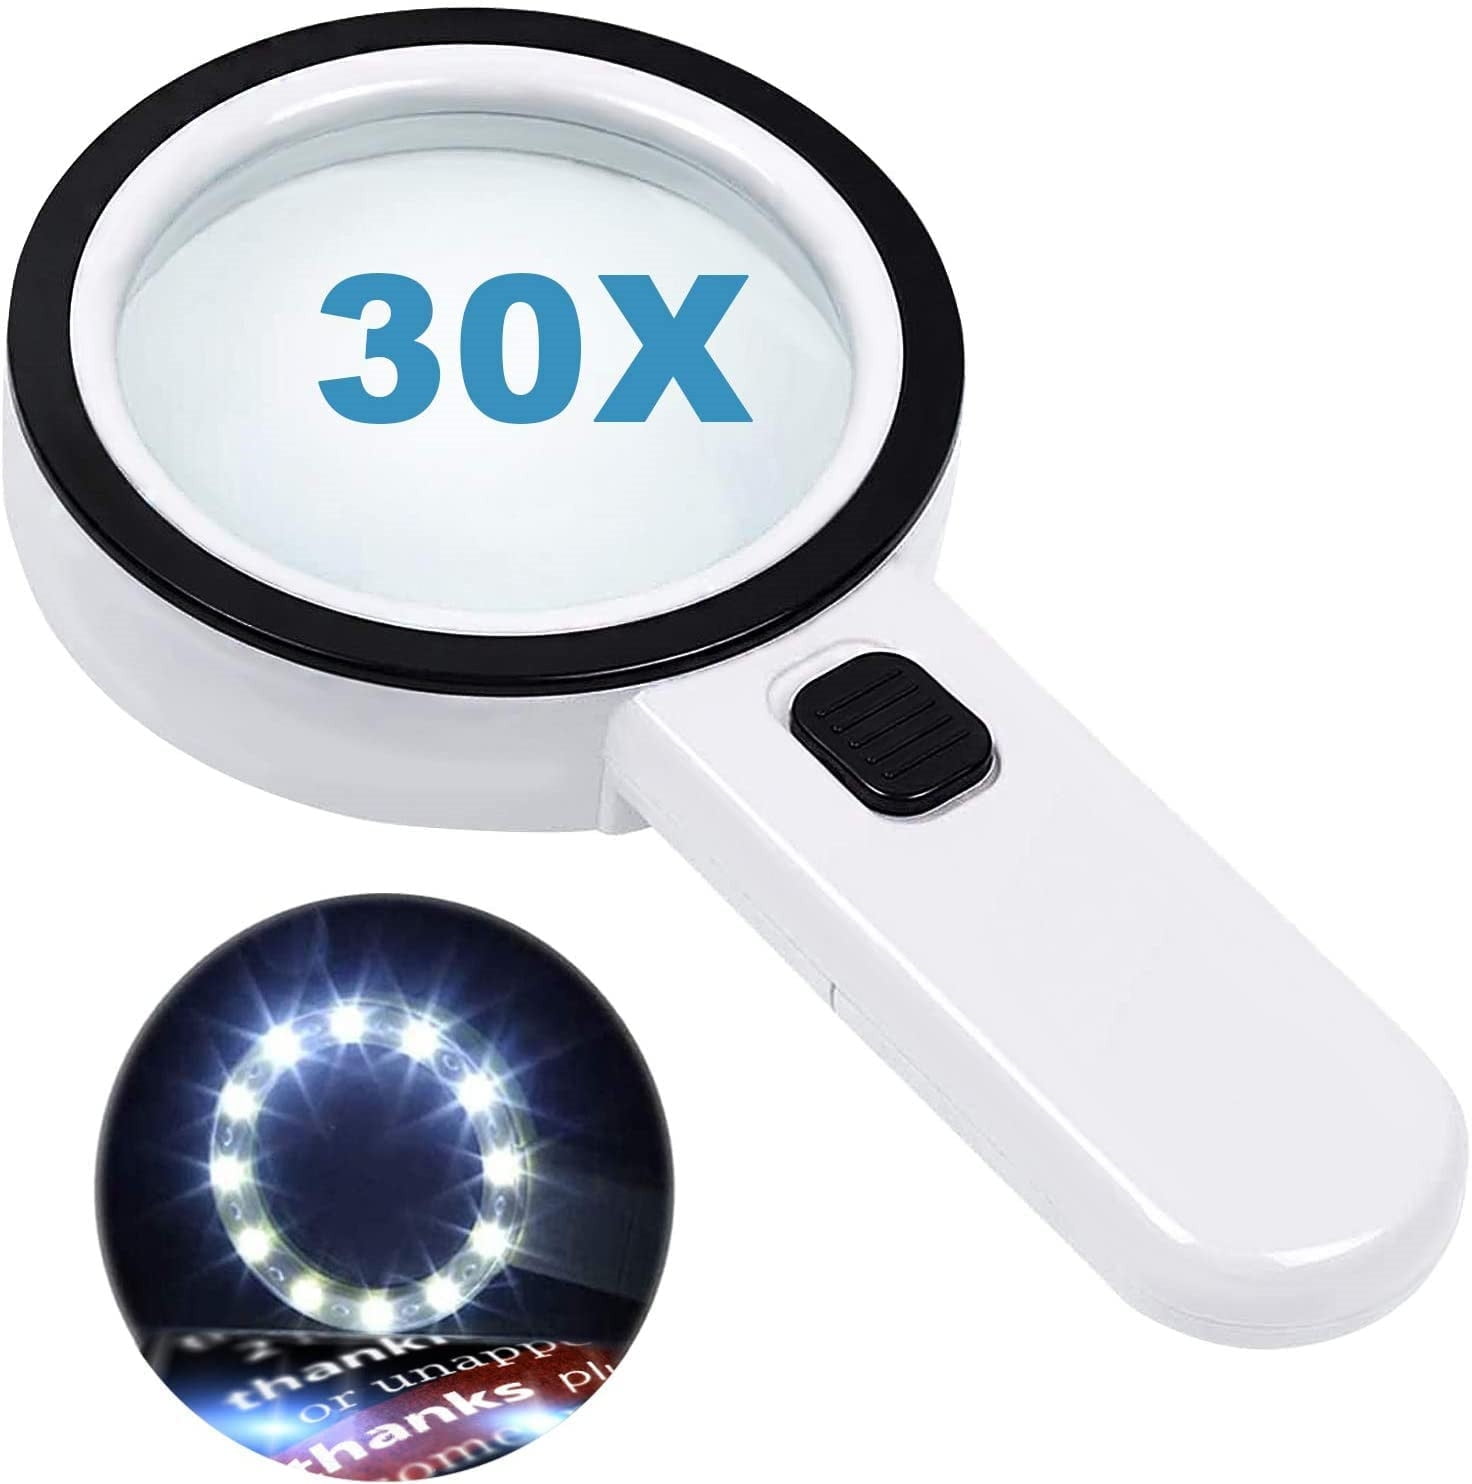 LHWCCPIT Rechargeable Magnifying Glass with 20 LED Light, 30X Handheld  Large Magnifying Glass Light with 3 Modes, Illuminated Lighted Magnifier  for